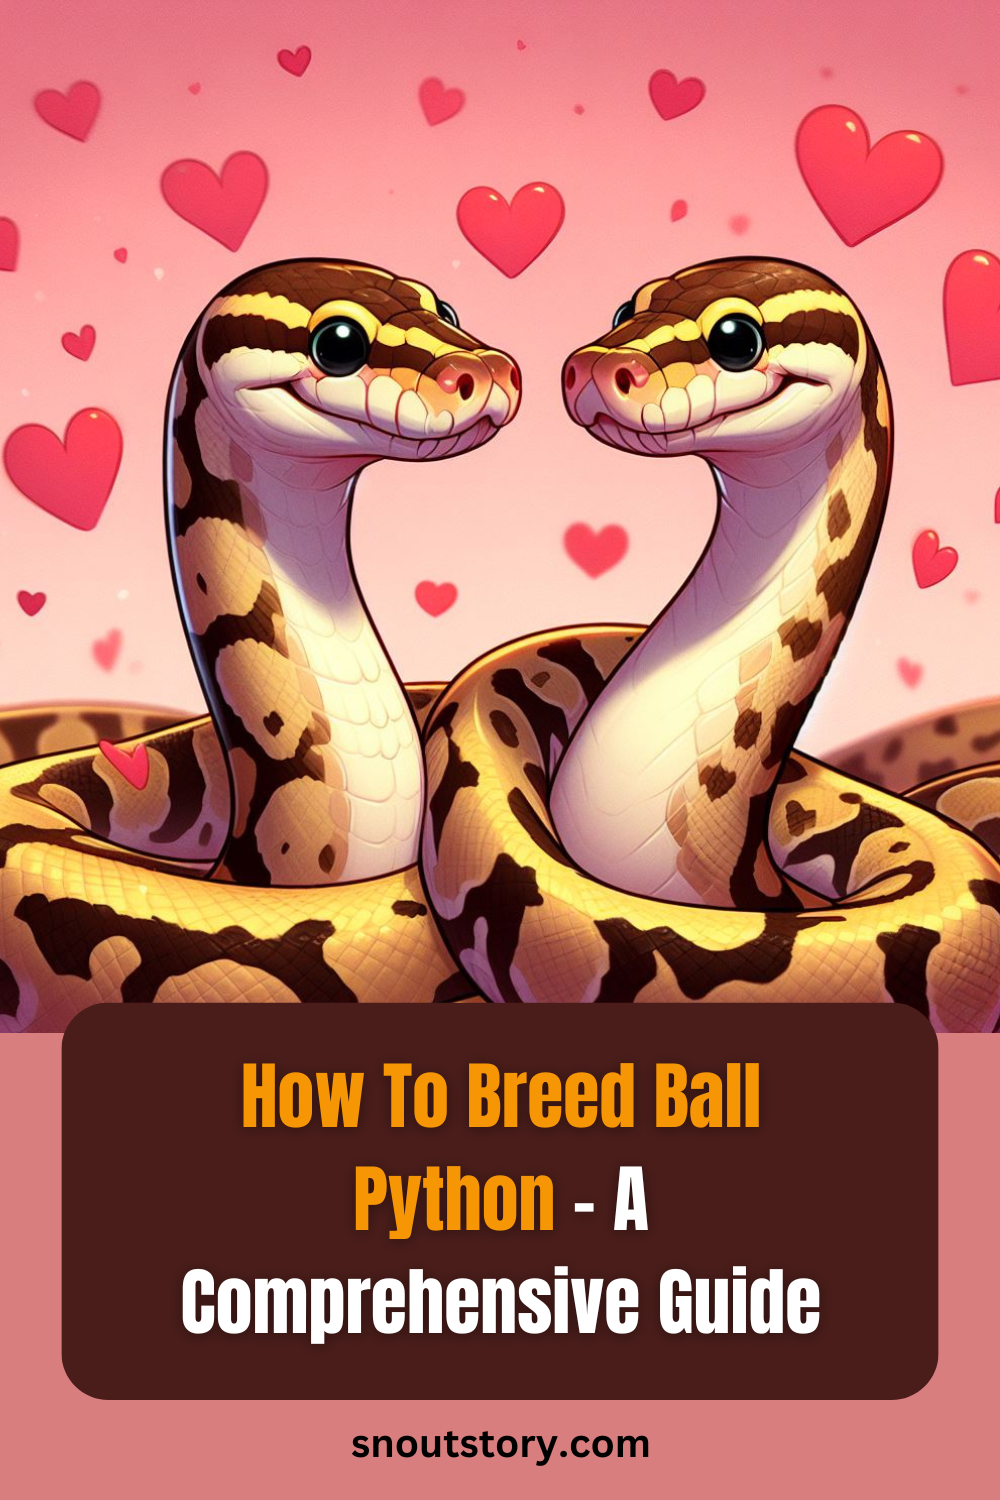 How To Breed Ball Python – A Comprehensive Guide